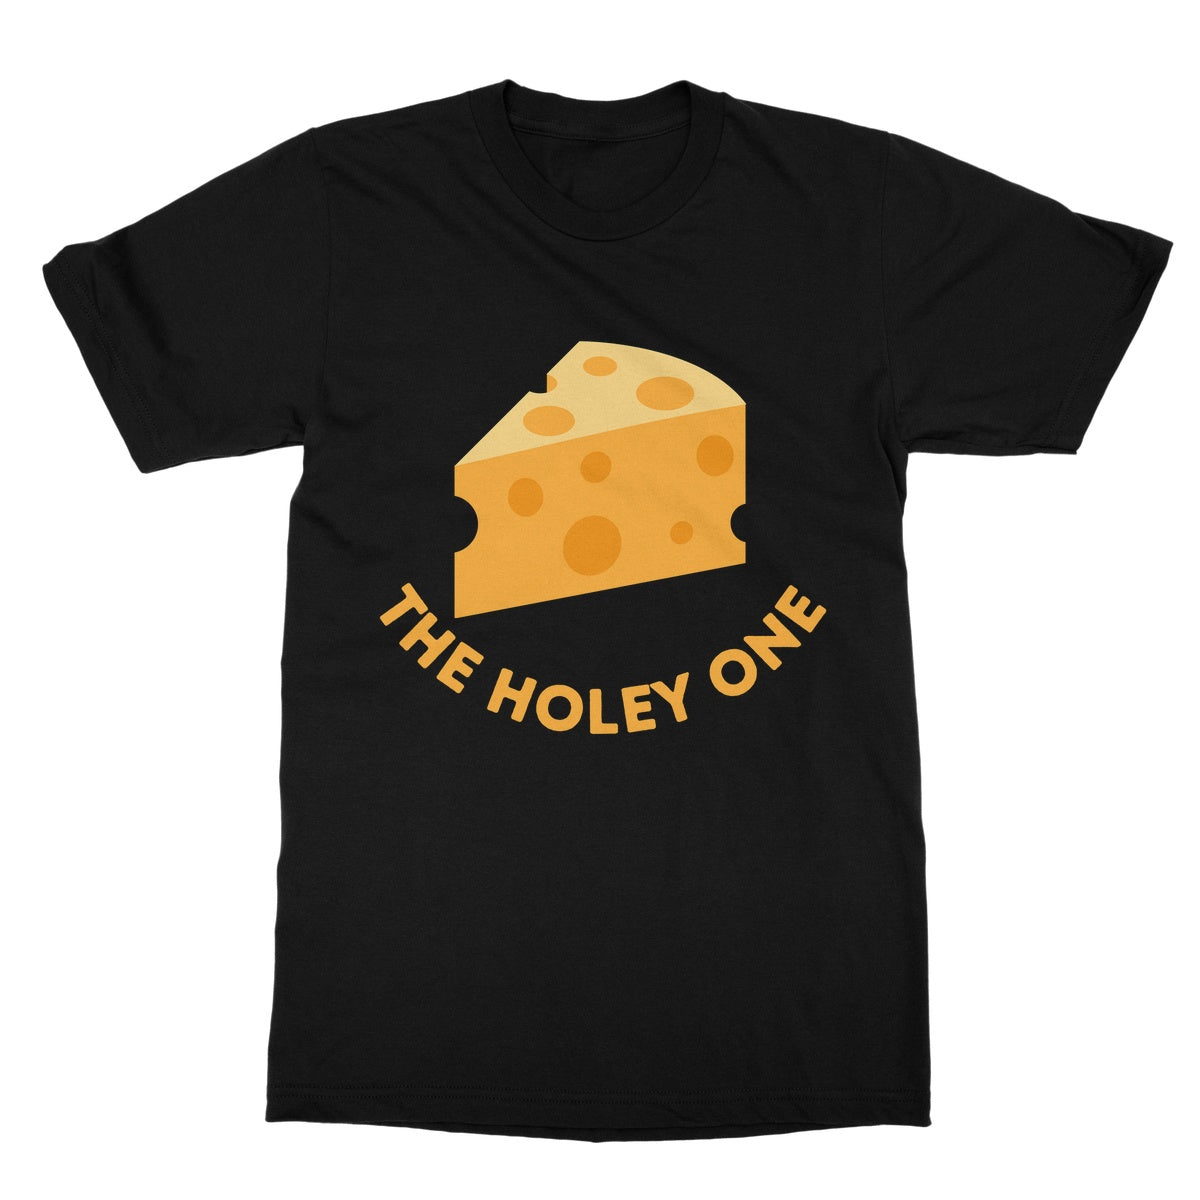 the holey cheese t shirt black